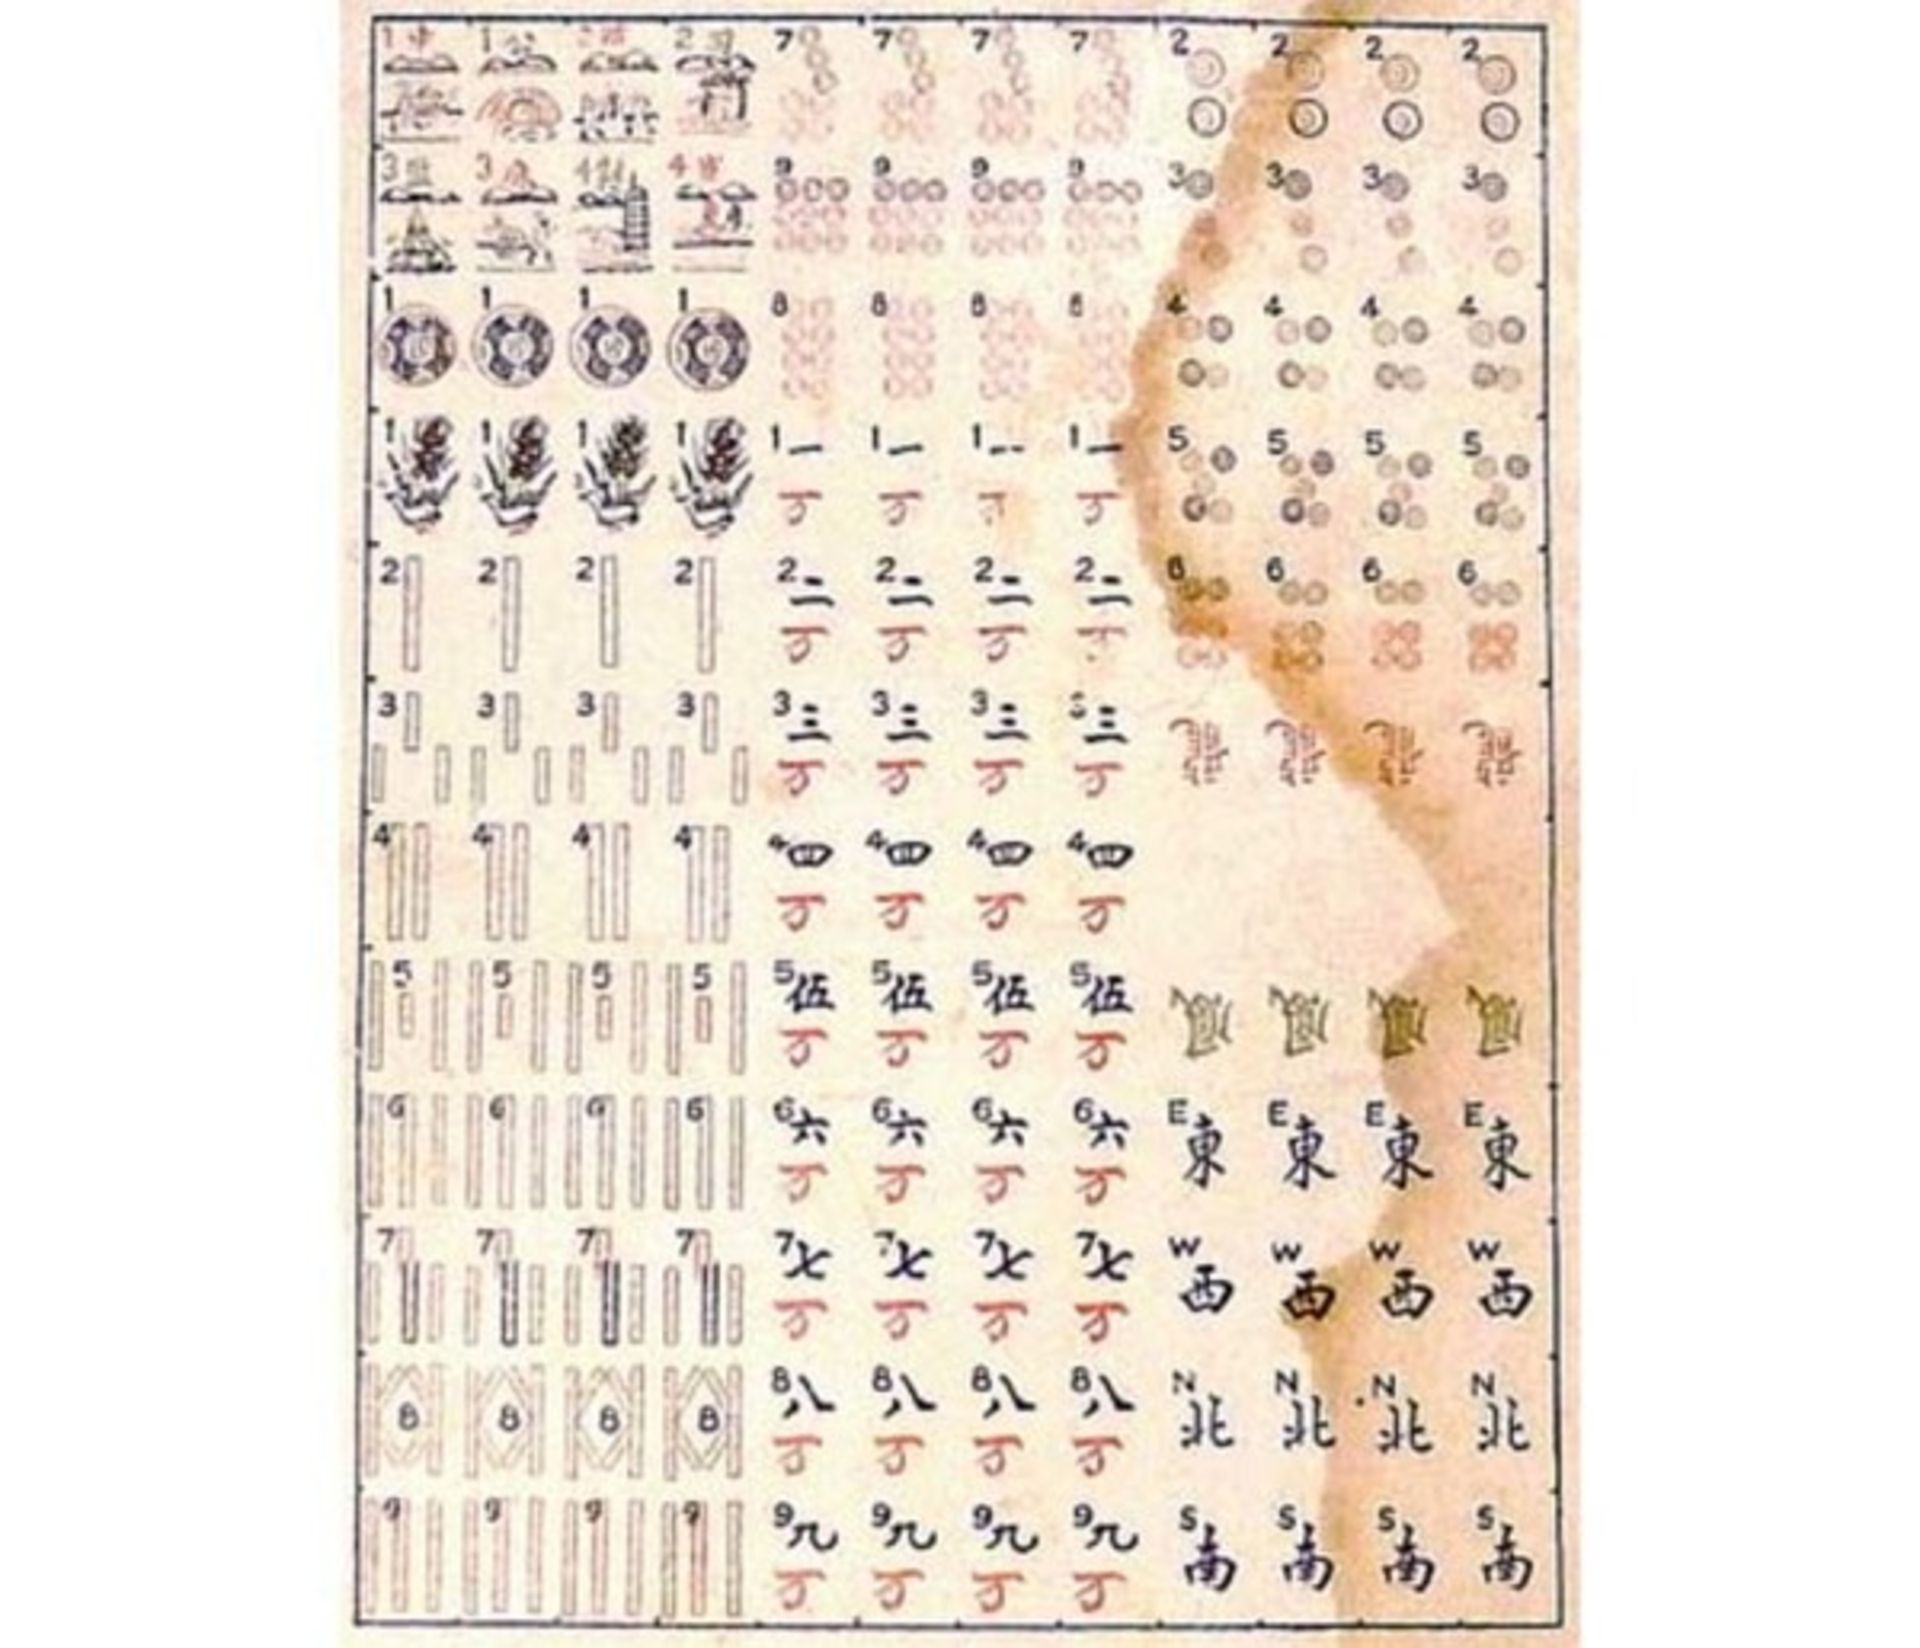 (Mahjong) Mahjong VS, The complete ancient and fascinating Chinese game, ca. 1924 - Bild 2 aus 13